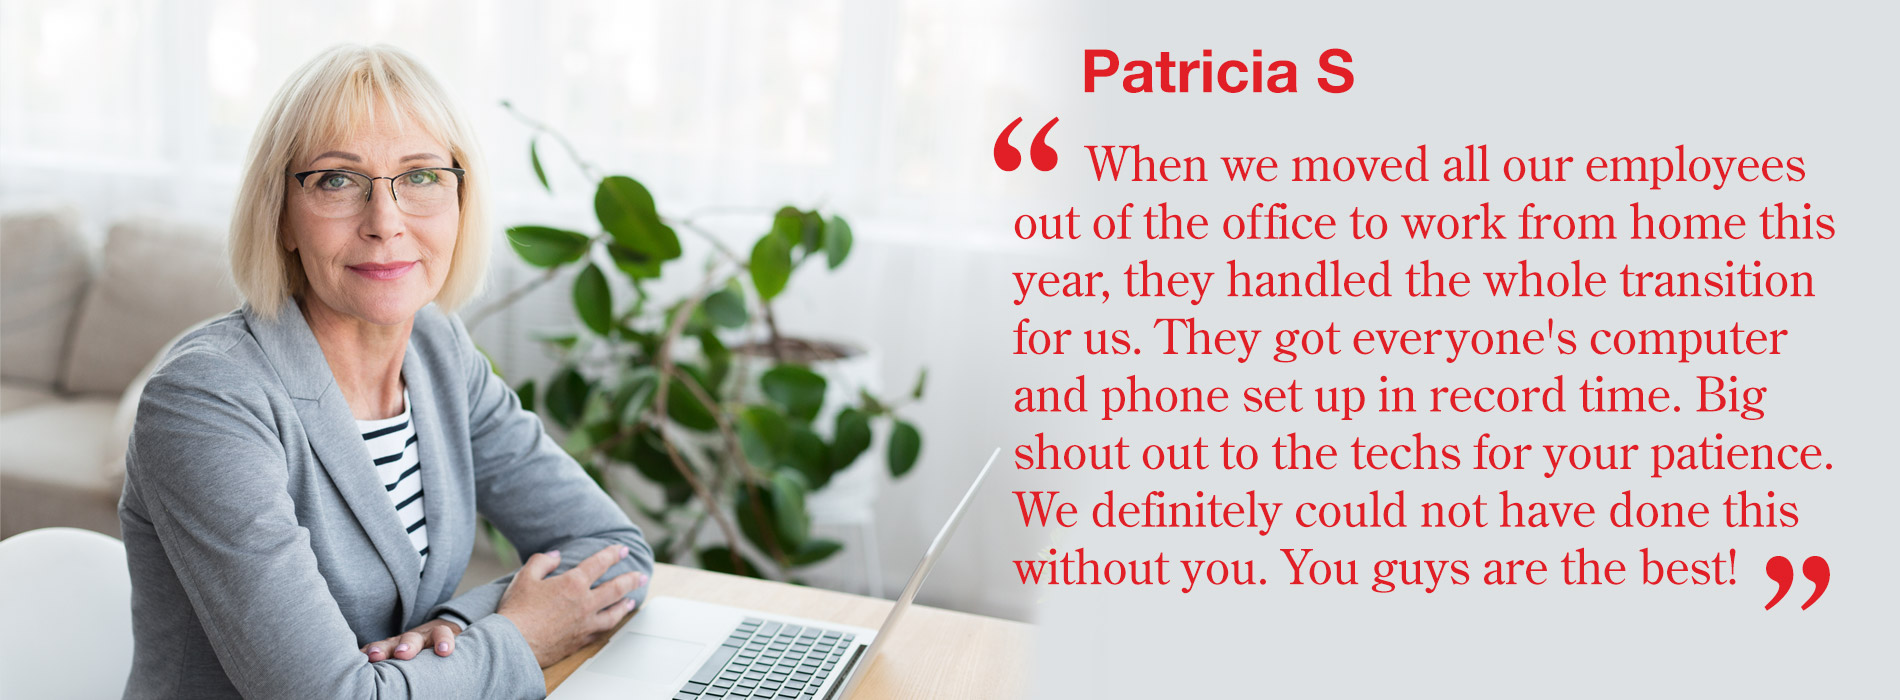 Patricia S - When we moved all our employees out of the office to work from home this year, they handled the whole transition for us. They got everyone's computer and phone set up in record time. Big shout out to the techs for your patience. We definitely could not have done this without you. You guys are the best!